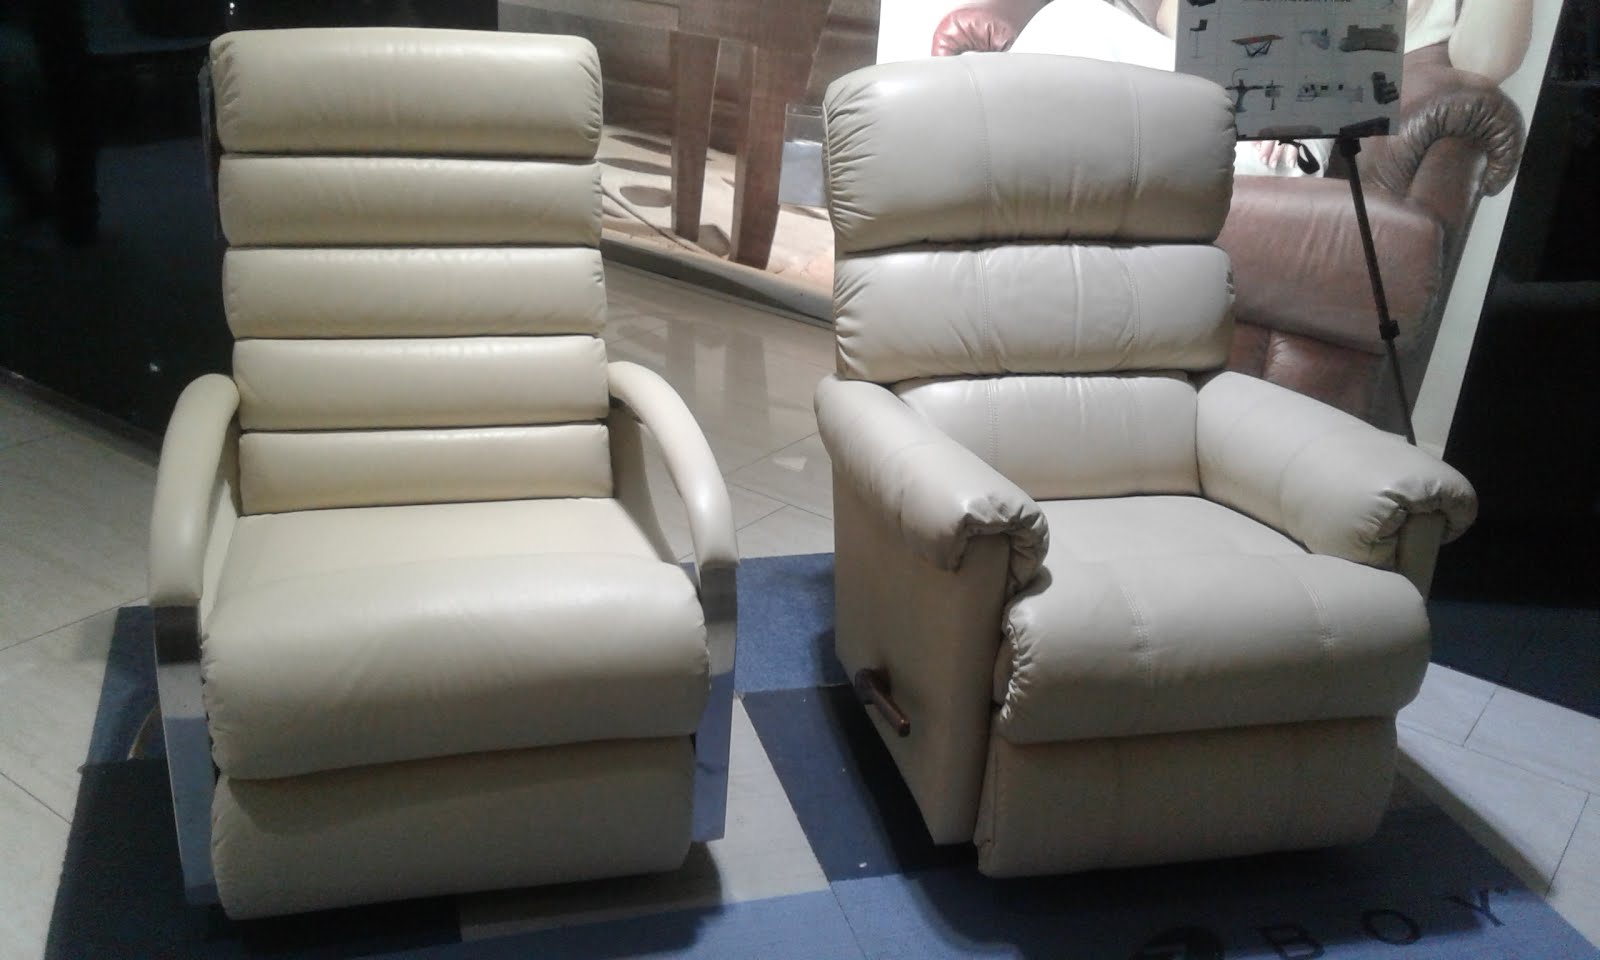 OUR PRODUCT RECLINER SOFA